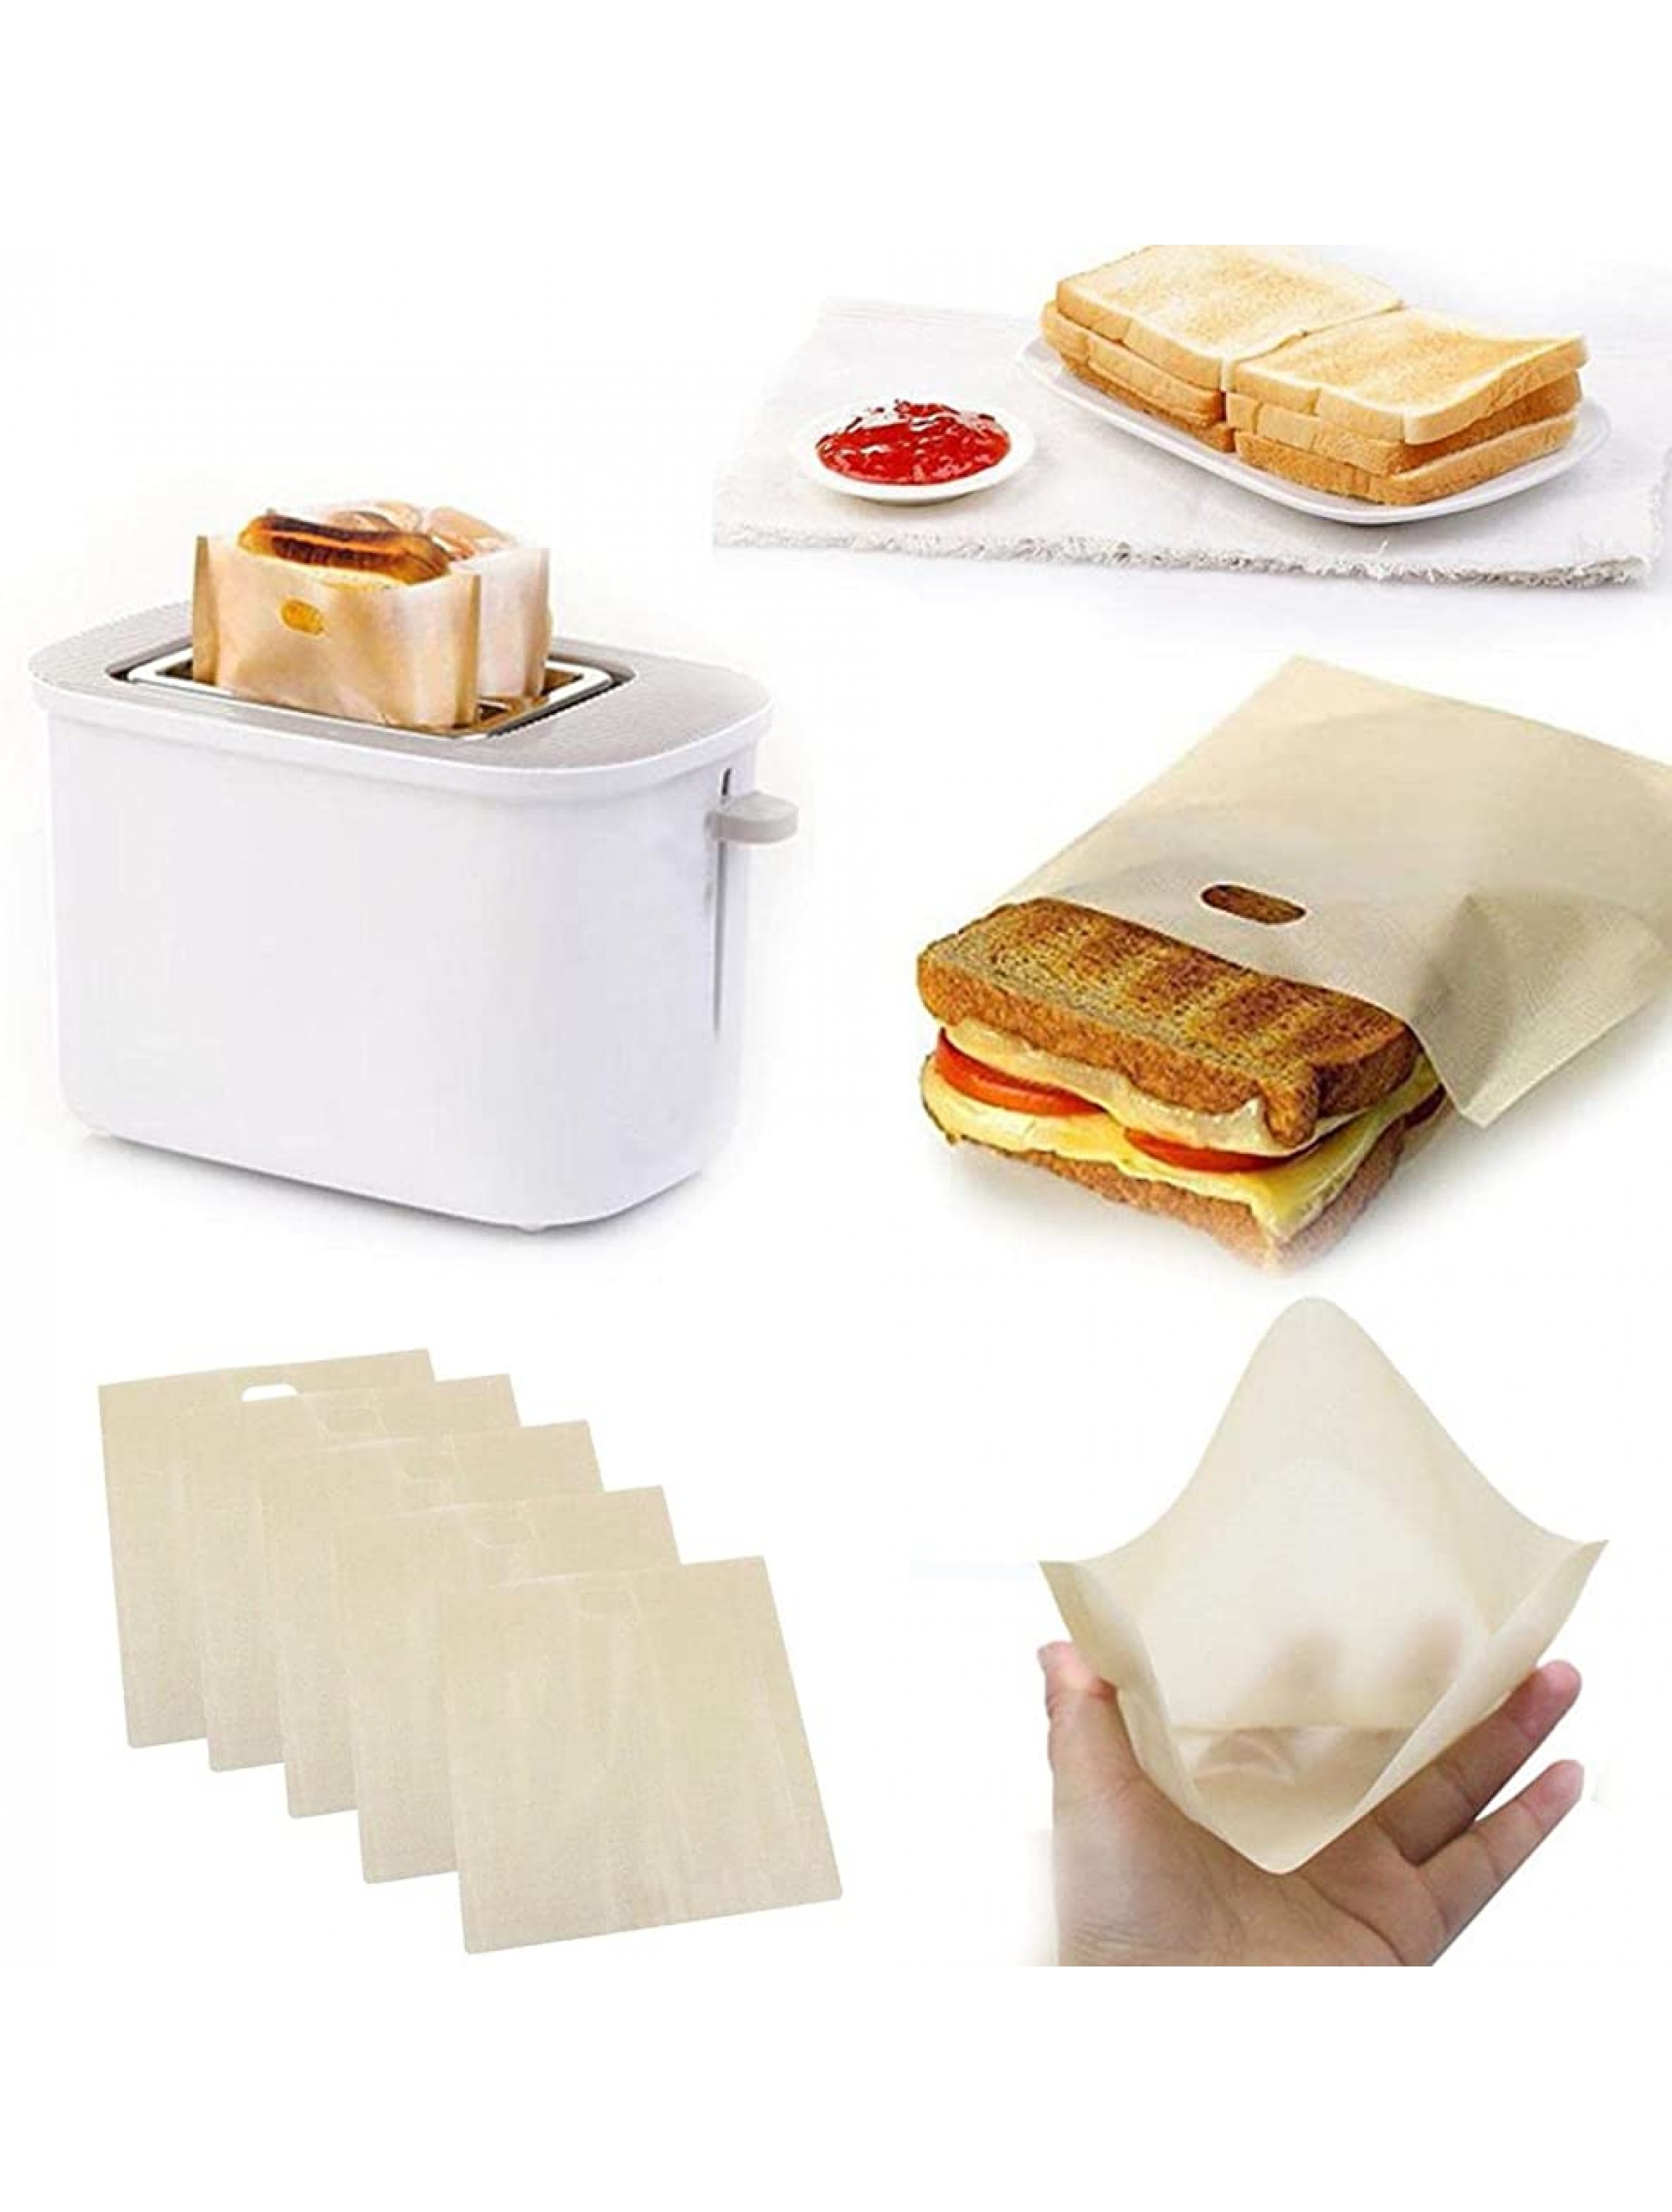 HowLoo 10 Pack Toaster Bag Reusable Non Sticky Toaster Bag Heat Resistant Easy to Clean Perfect for Grilled Cheese Sandwiches Pizza Croissants Used in Oven Toaster or Microwave 6.3x6.5in - BTS3B4WIV